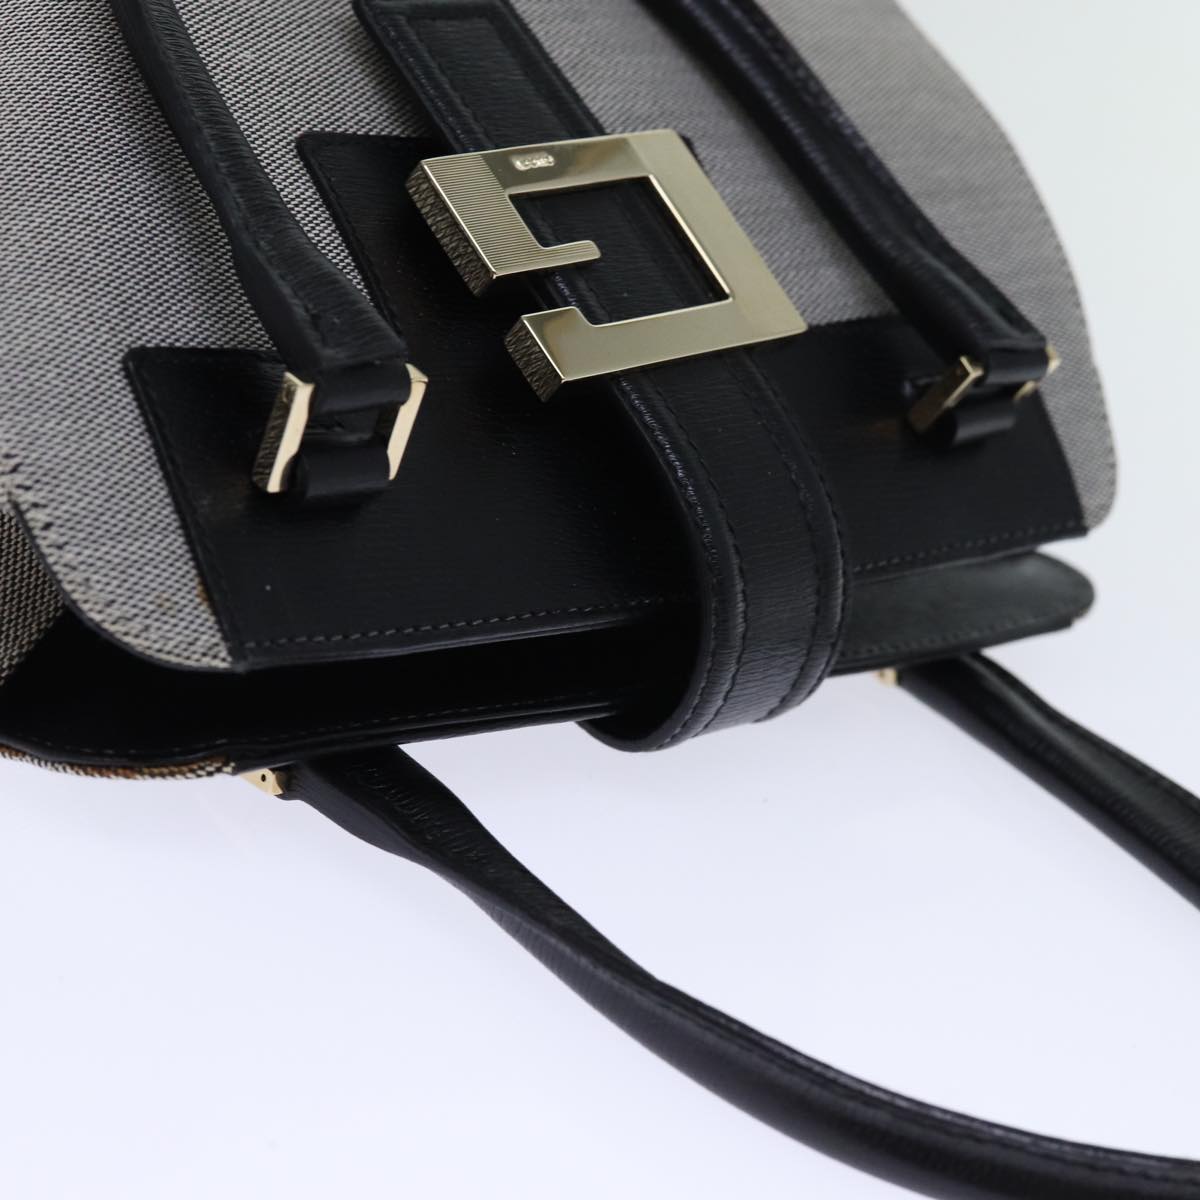 GUCCI Hand Bag Canvas Gray Auth yk12484